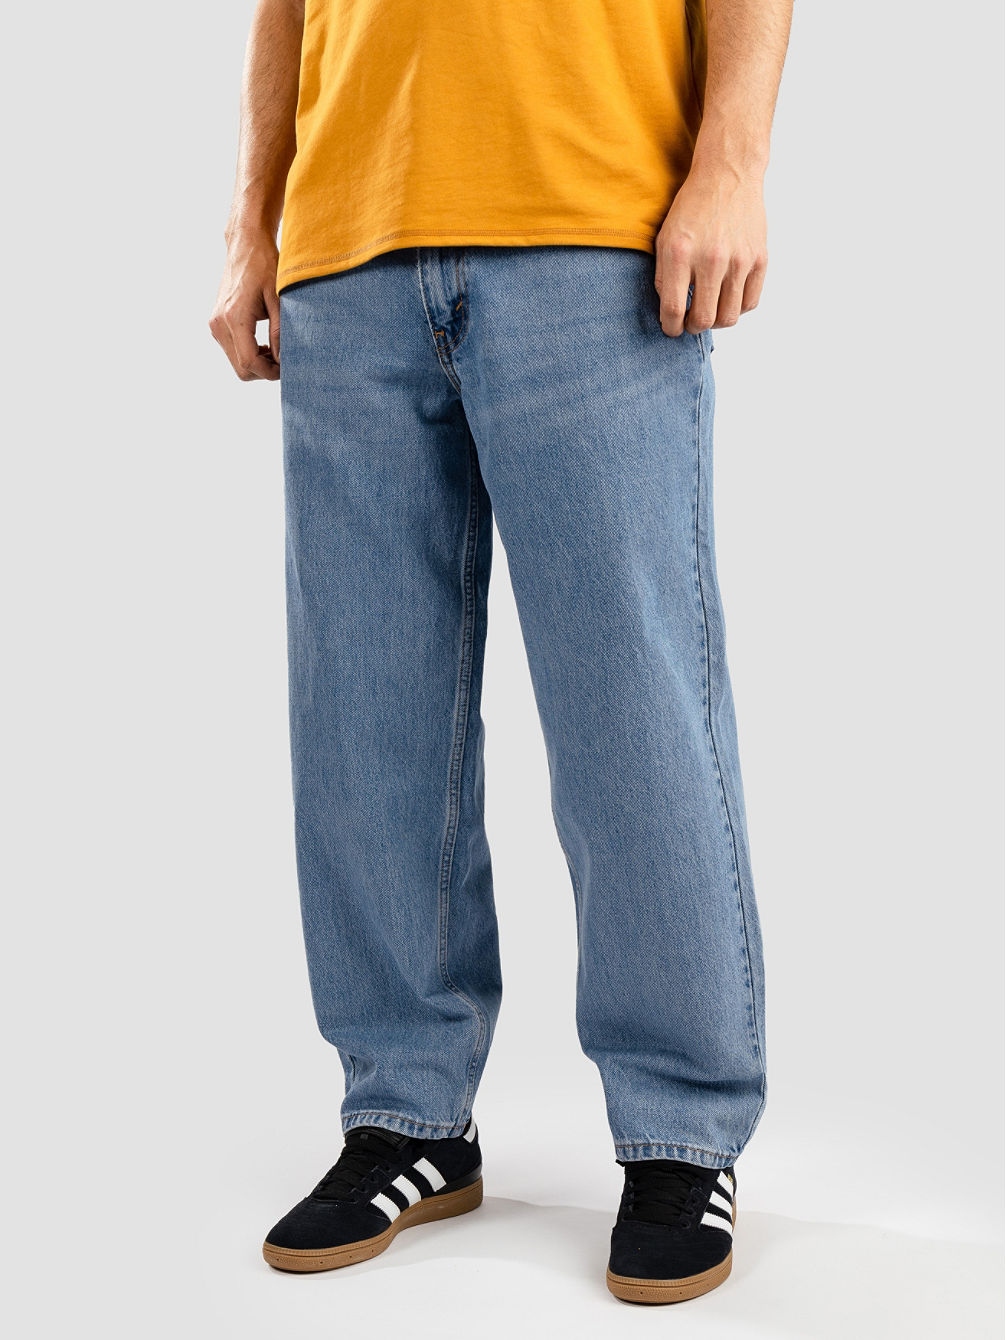 Levi's 578 Baggy Greys Jeans - buy at Blue Tomato